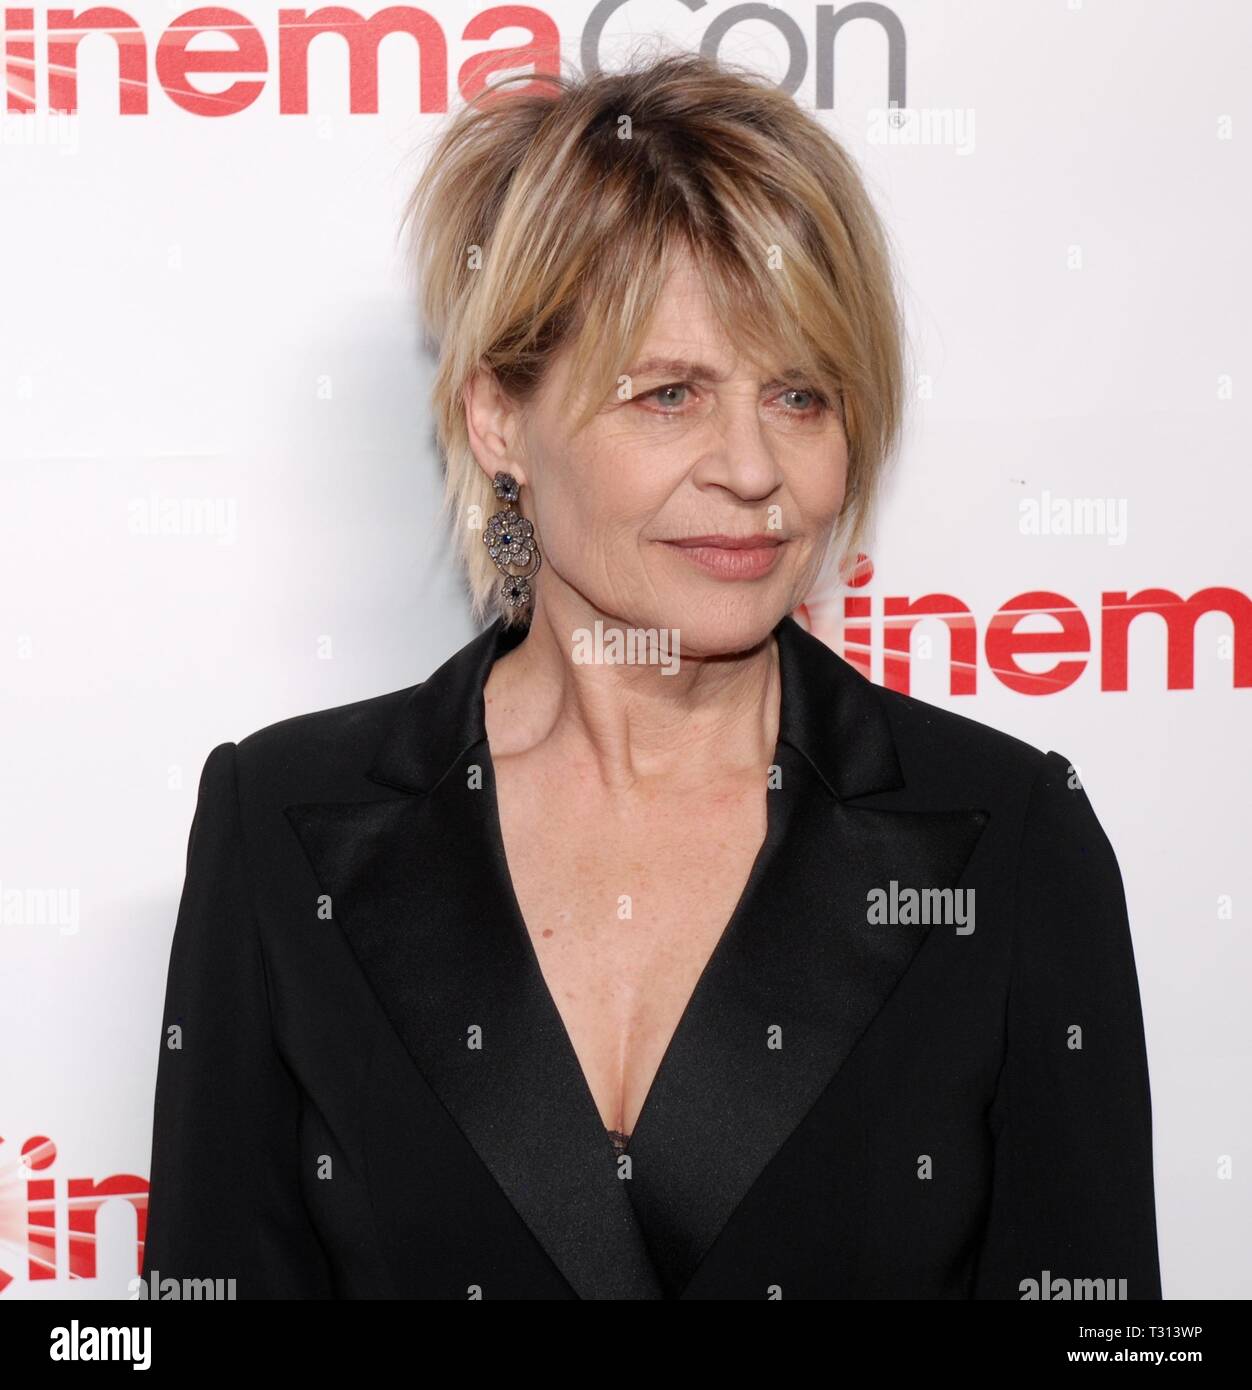 LAS VEGAS, NV - APRIL 04: Linda Hamilton attends The CinemaCon Big Screen Achievement Awards at OMNIA Nightclub at Caesars Palace during CinemaCon, the official convention of the National Association of Theatre Owners, on April 4, 2019 in Las Vegas, Nevada.    People: Linda Hamilton Stock Photo